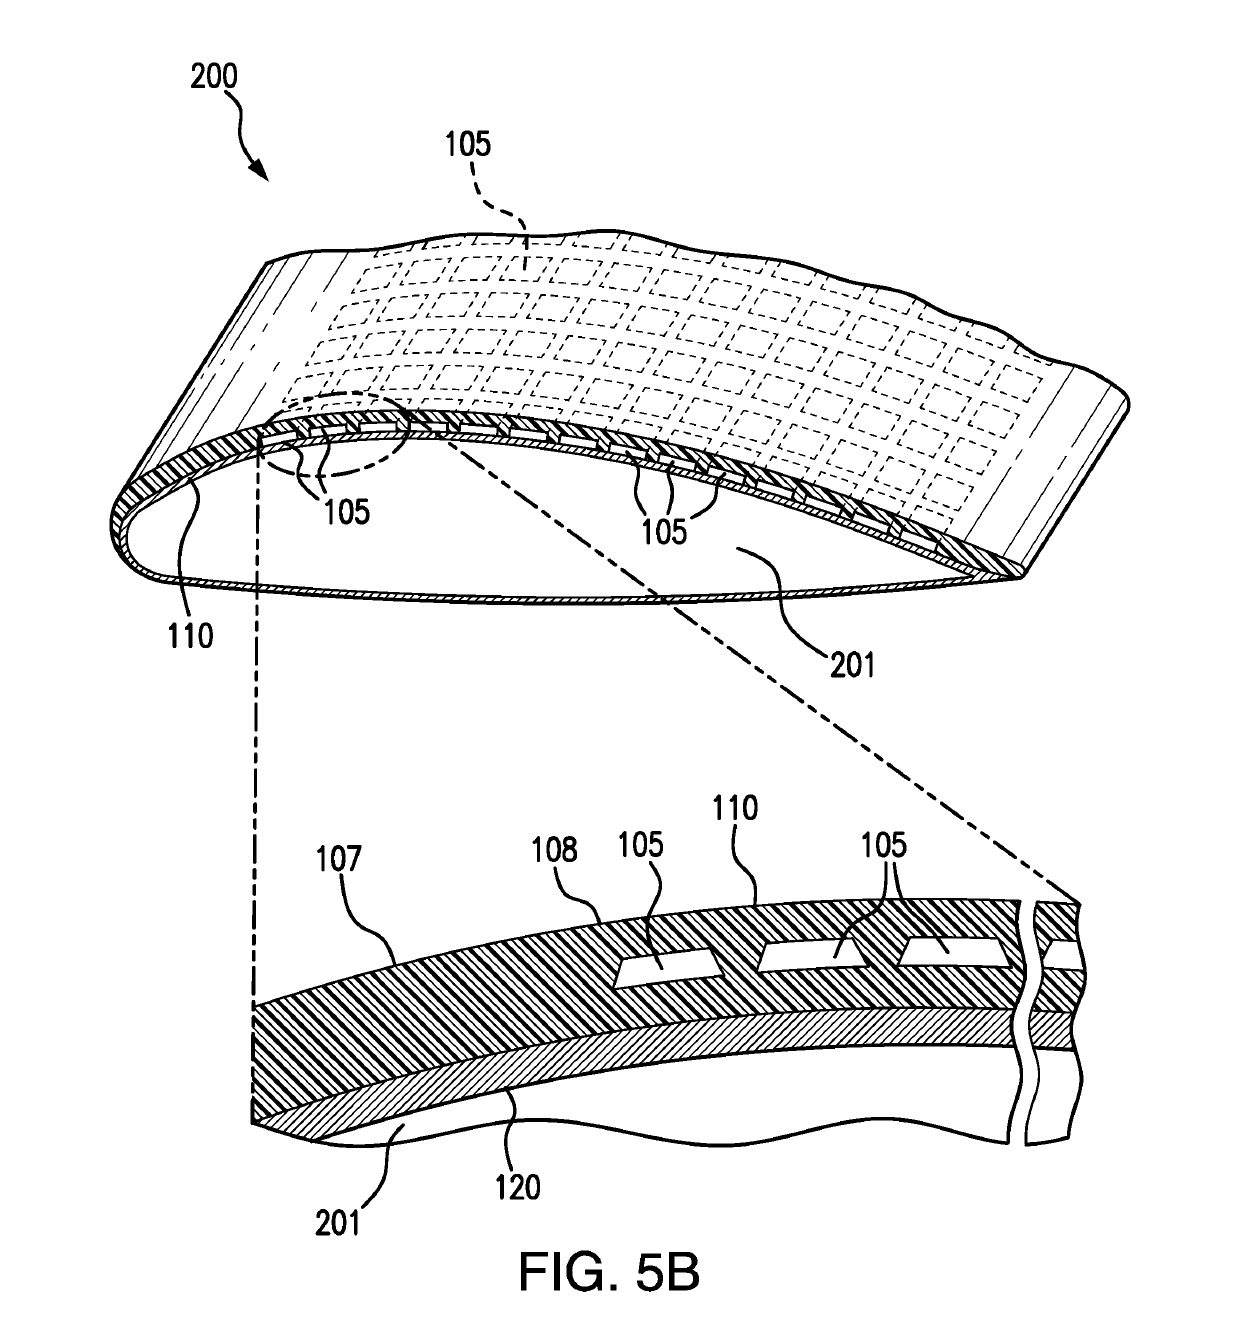 Laminar airfoil and the assembly and mounting of solar cell arrays on such airfoils